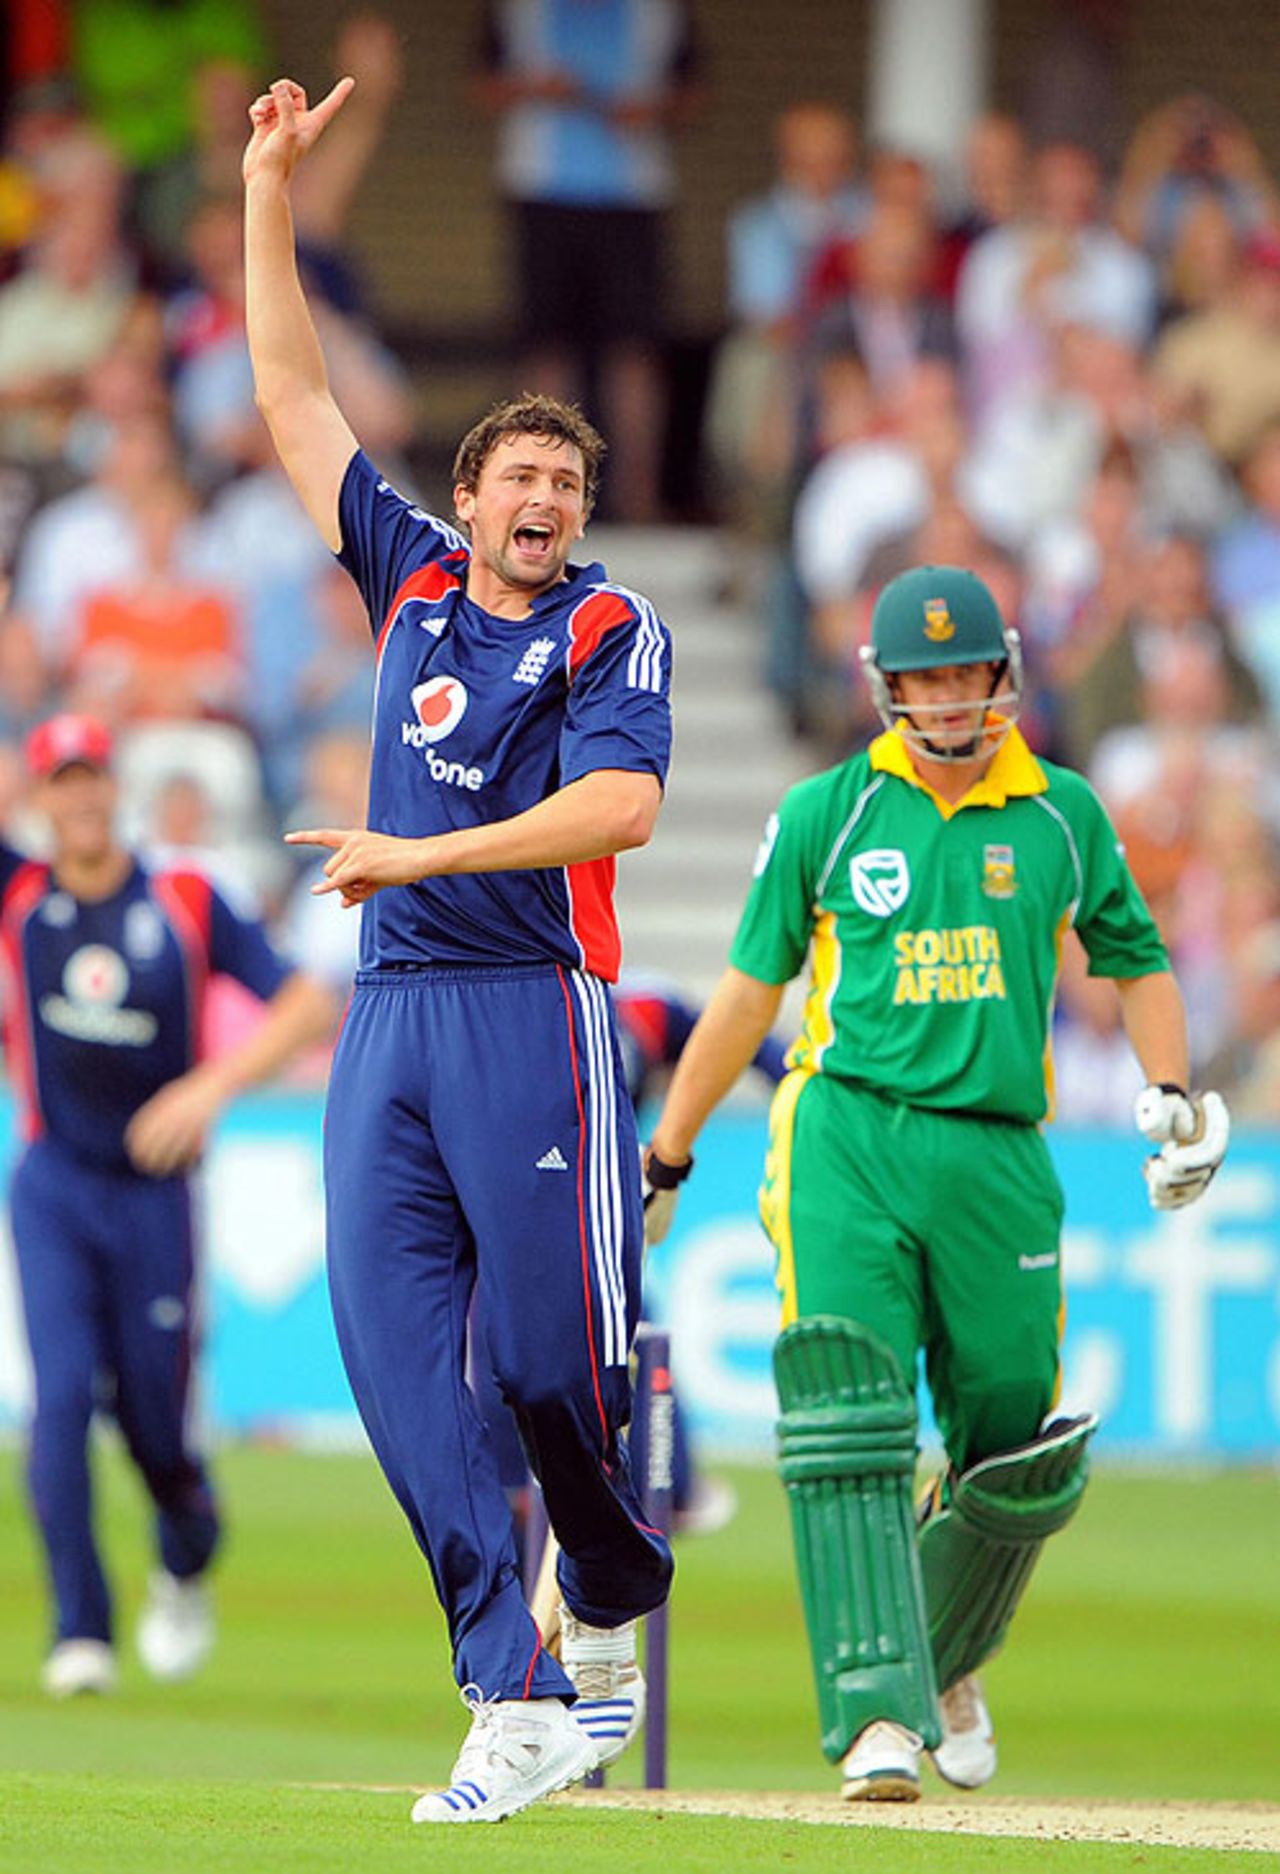 Steve Harmison claims Andre Nel's wicket with his first ball of the match as South Africa are bowled out for 83, England v South Africa, 2nd ODI, Trent Bridge, August 26, 2008